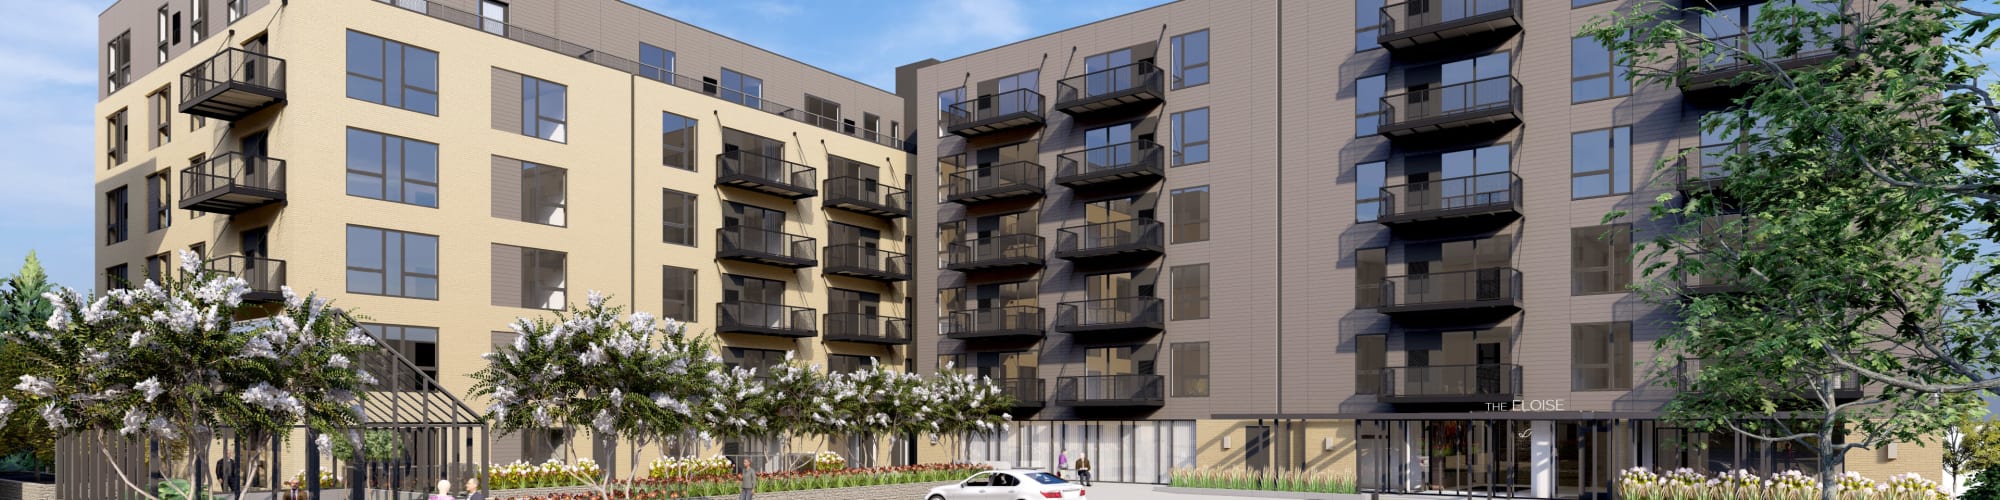 Minneapolis Apartments near Bryn Mawr Meadows Park | The Eloise at Wirth on  the Woods